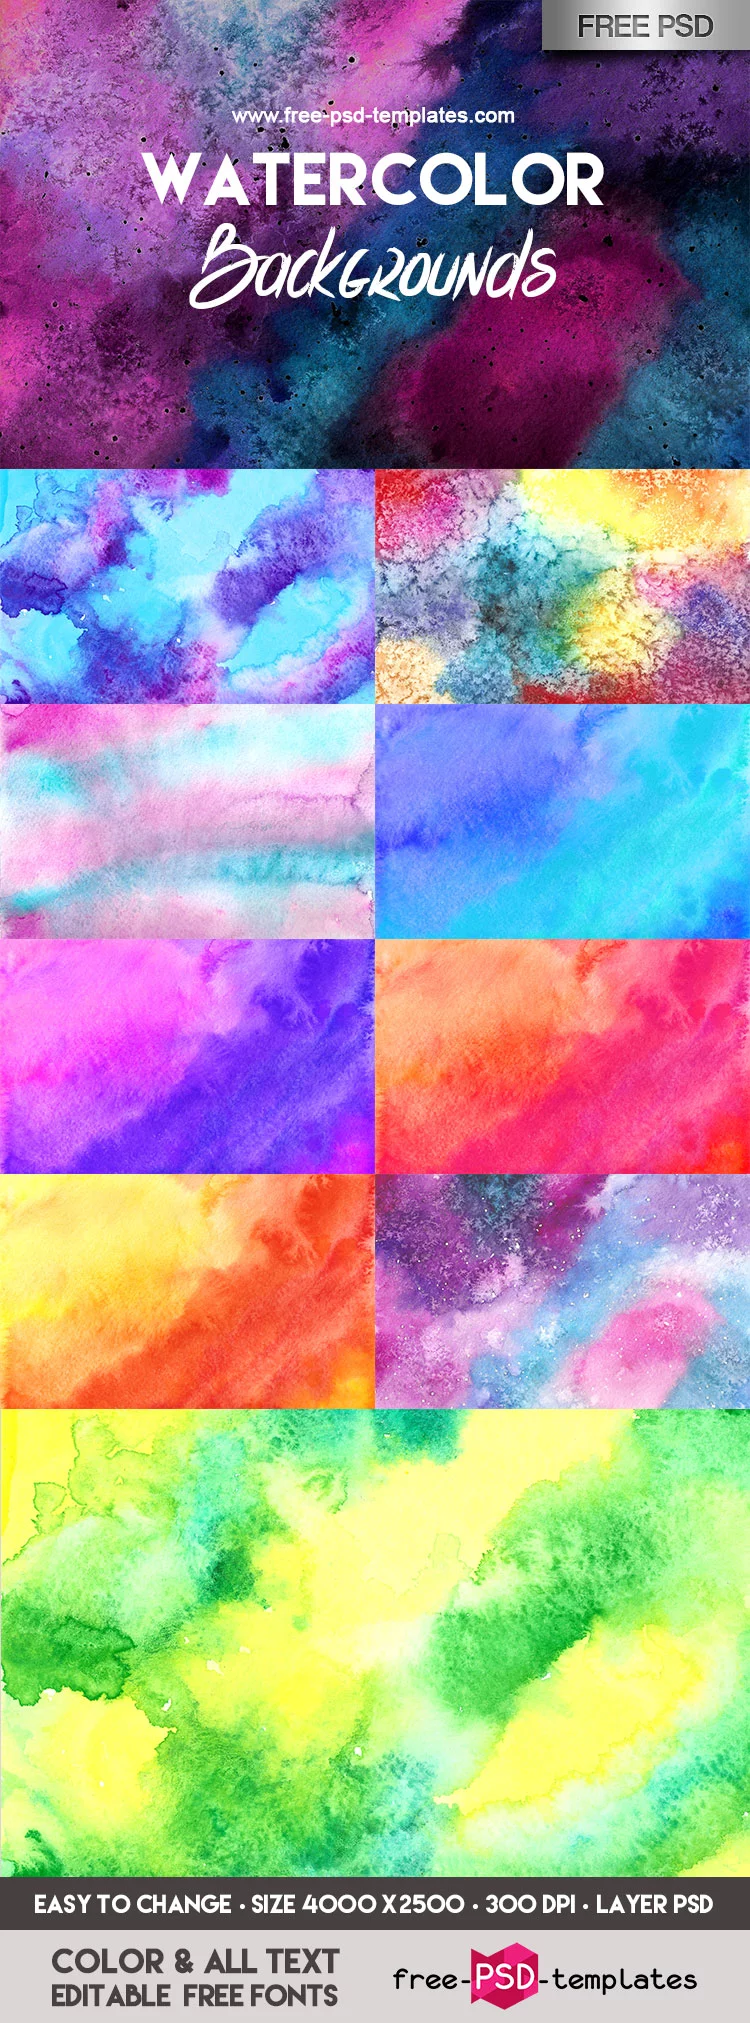 10+ Free Watercolor Abstract Background Images (PSD)